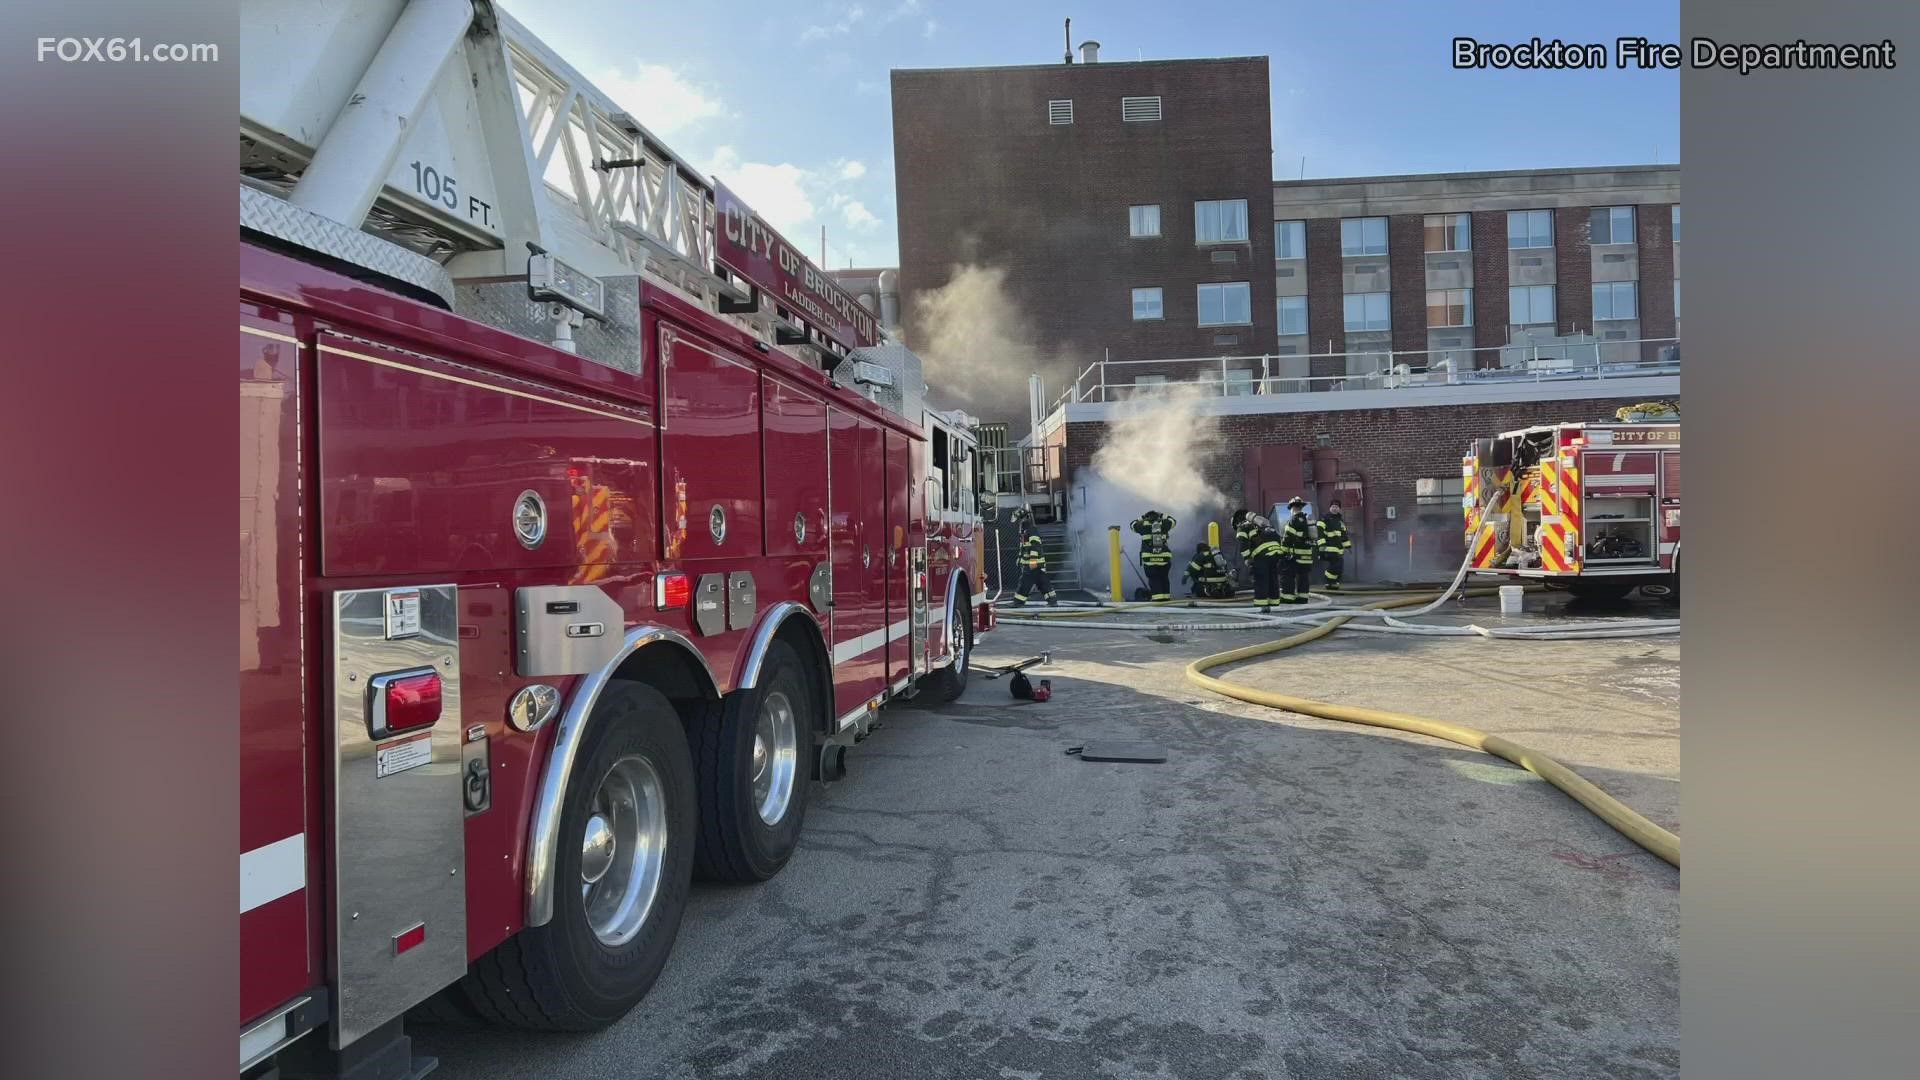 Firefighters evacuated Brockton Hospital after a fire on the campus broke out.